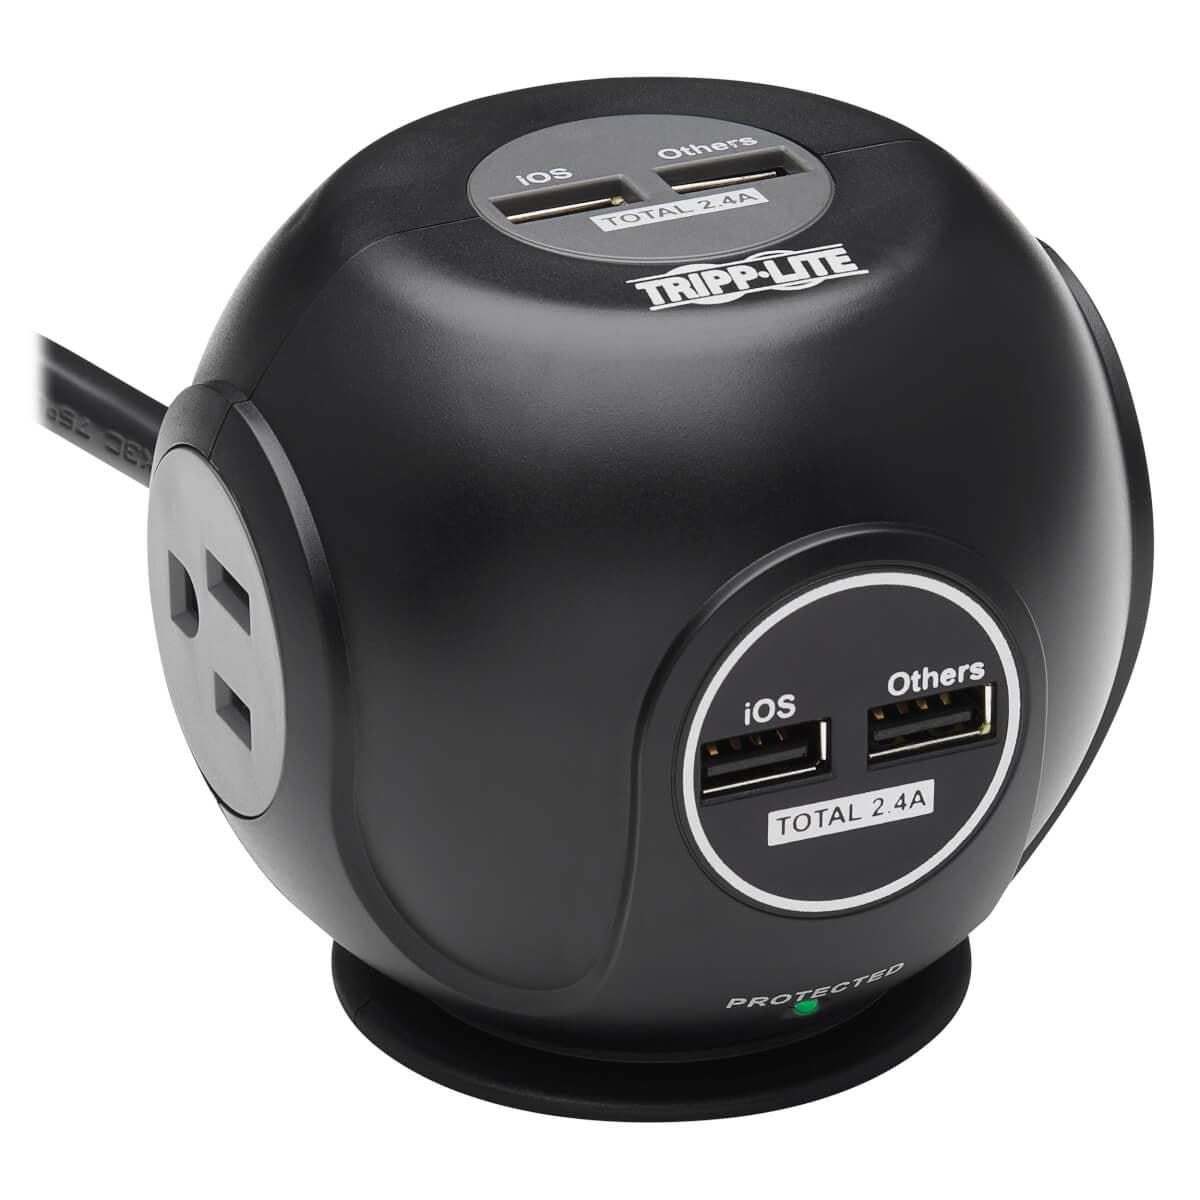 Tripp Lite 3-Outlet Spherical Surge Protector, 4 Usb Ports (4.8A Shared) - 6-Ft. (1.83 M) Cord, 5-15P Plug, 540 Joules, Black